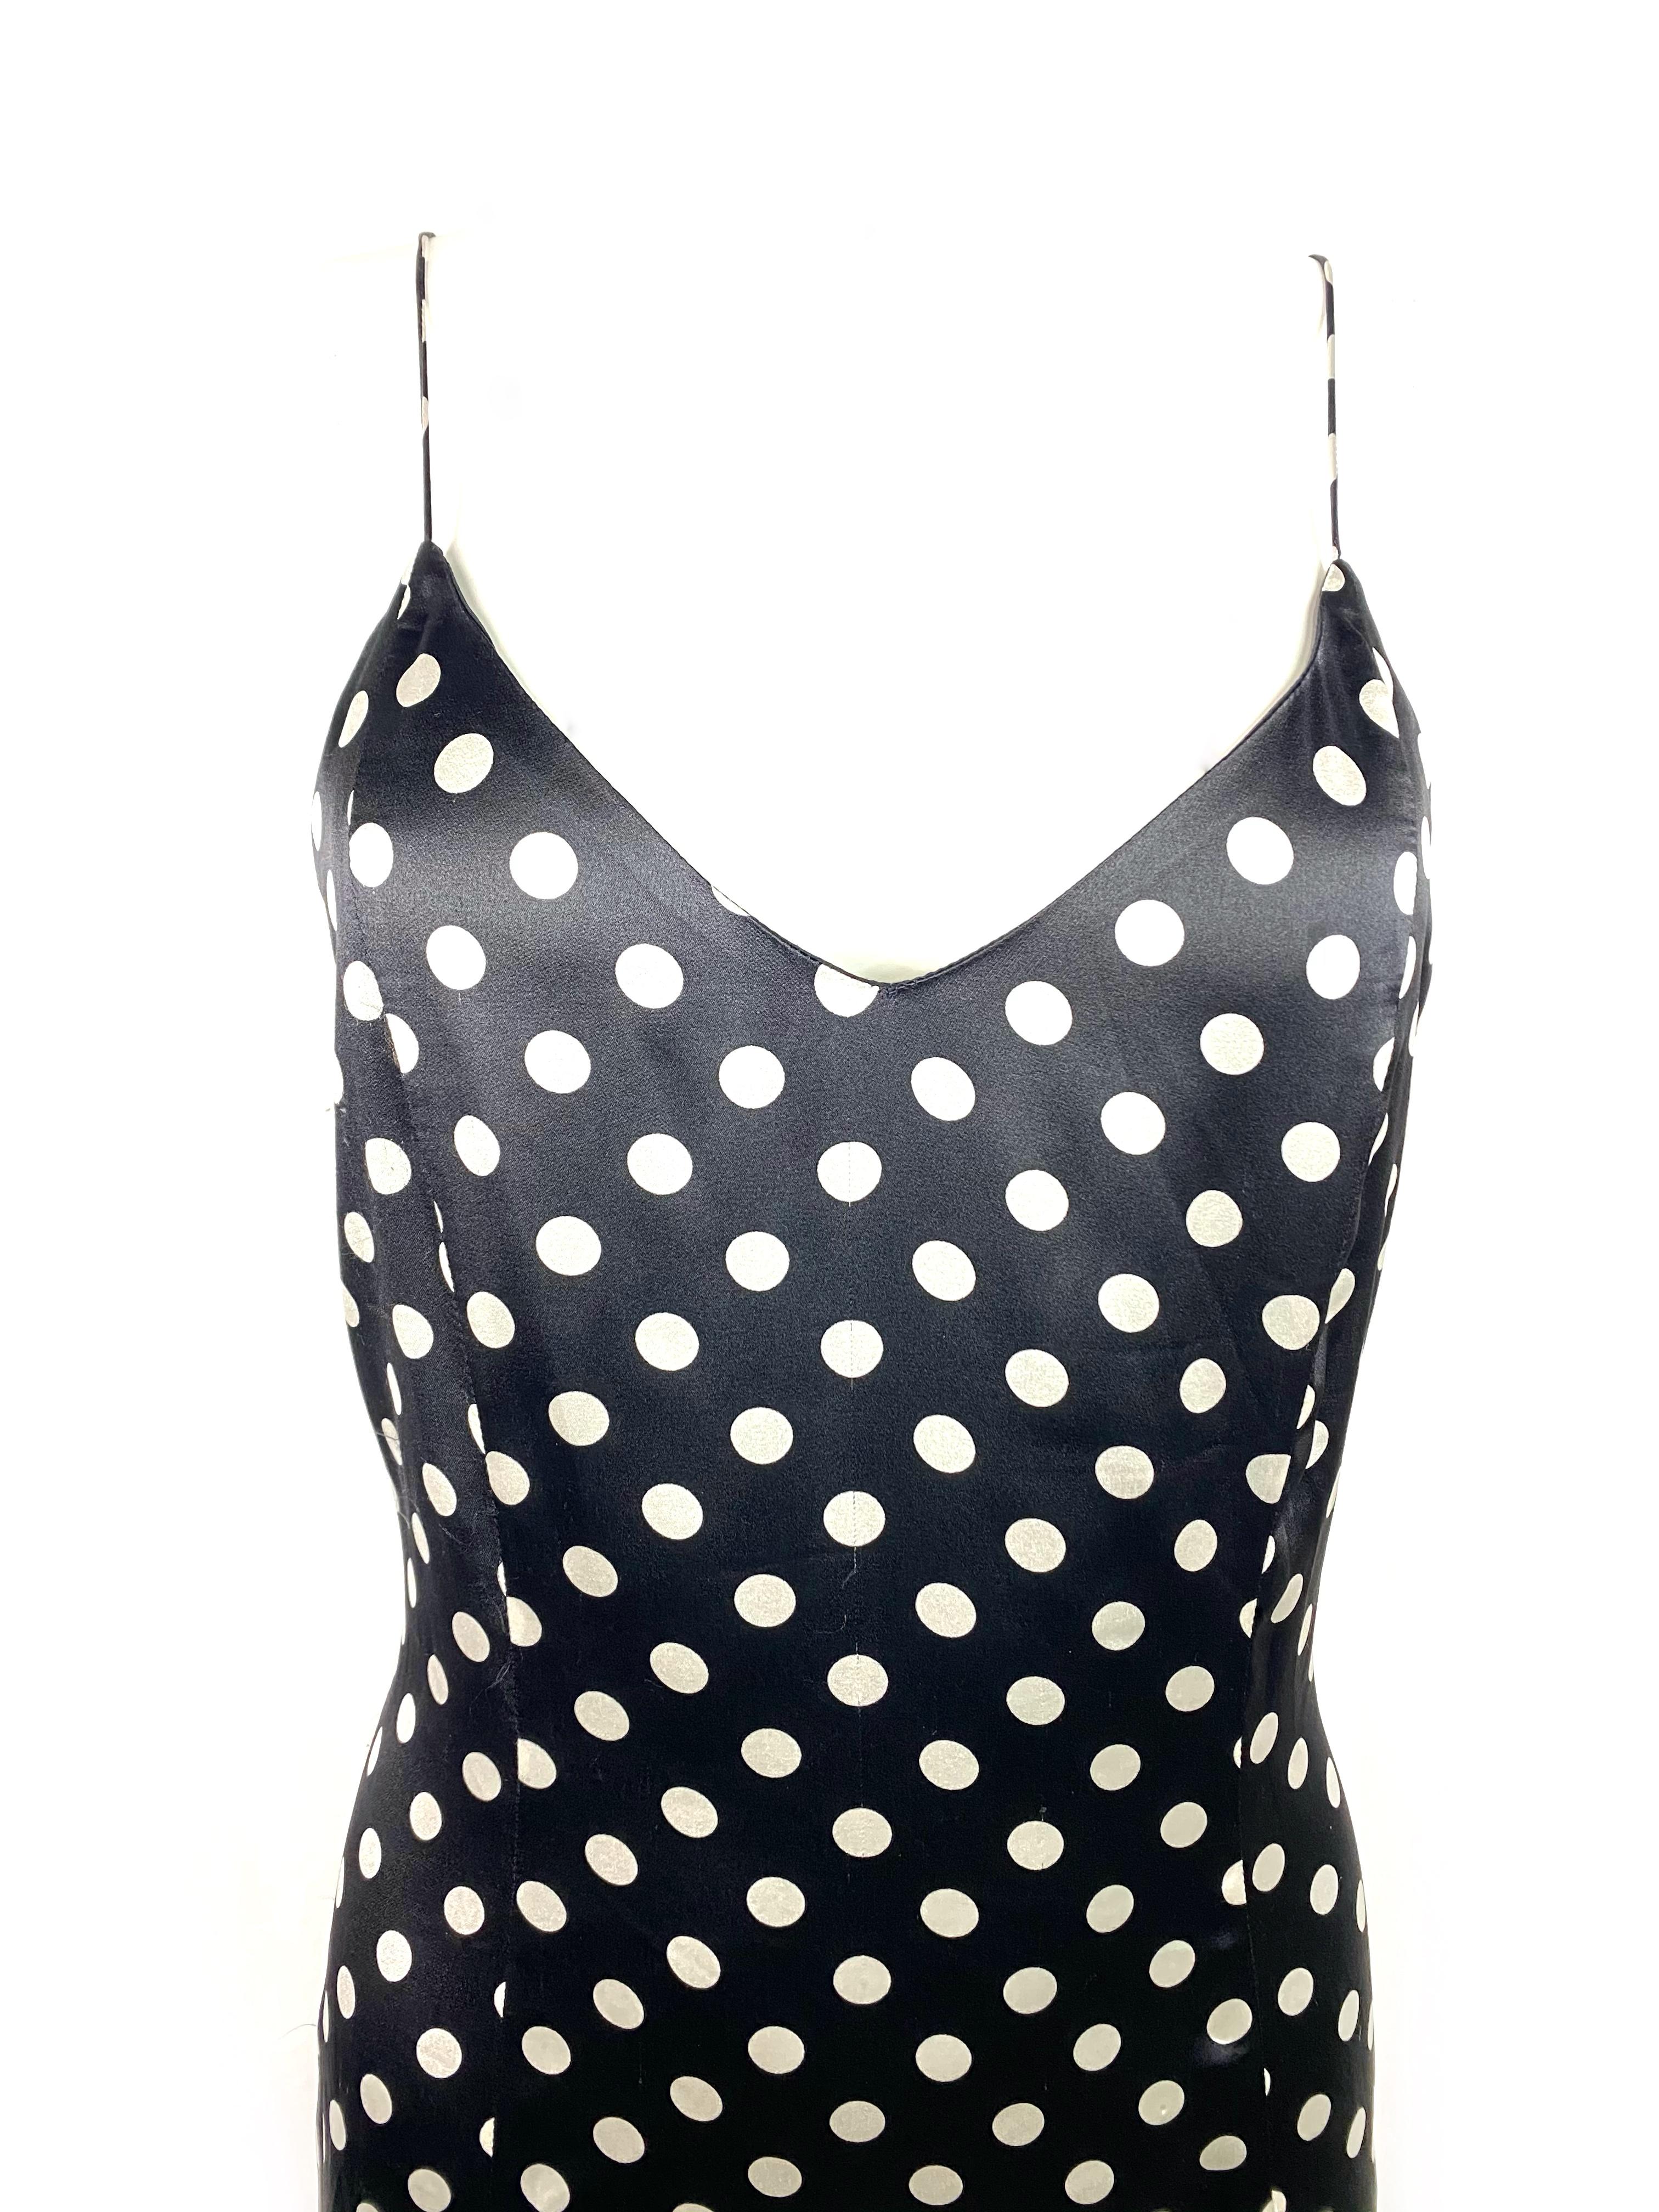 Product details:

The dress features black and white polka dot pattern, spaghetti straps, side zip and hook closure, mid length. 